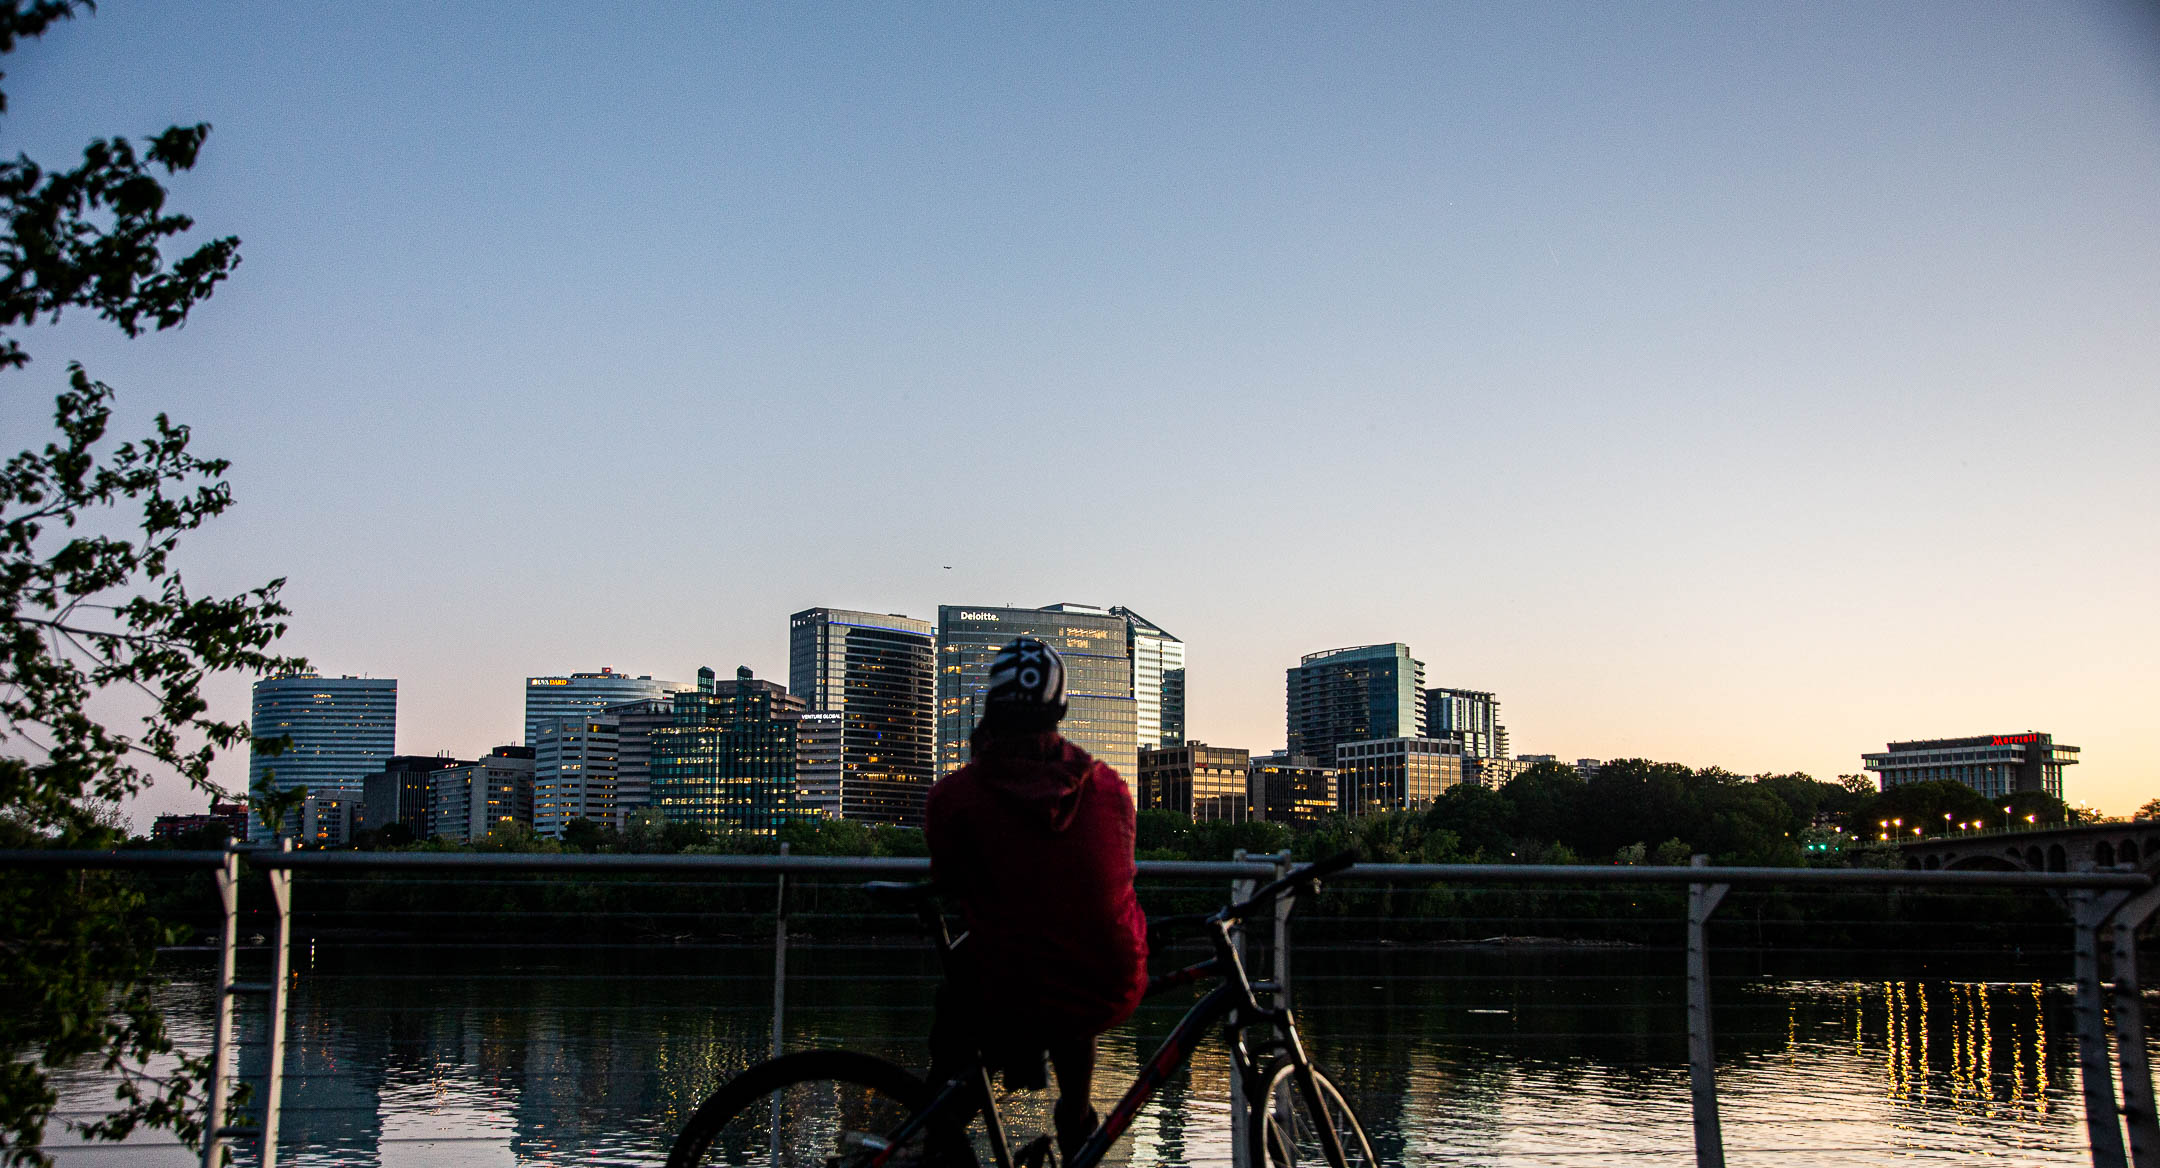 A cyclist in a red jacket looks out towards a city skyline, water separating them and reflecting the evening lights of the buildings.